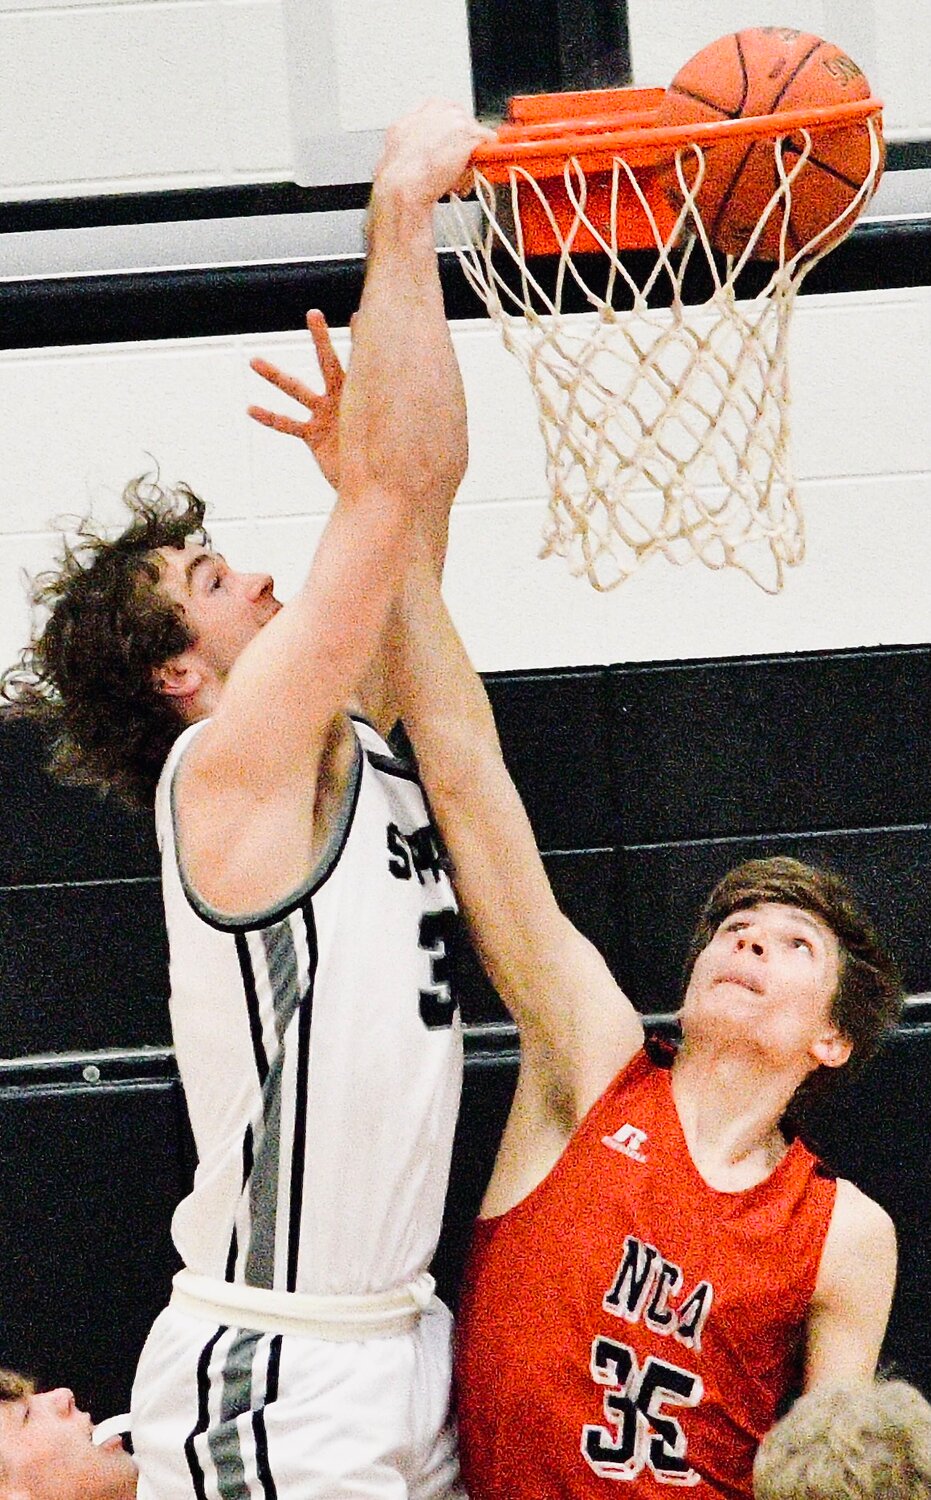 SPARTA'S JAKE LAFFERTY dunks on a New Covenant player.